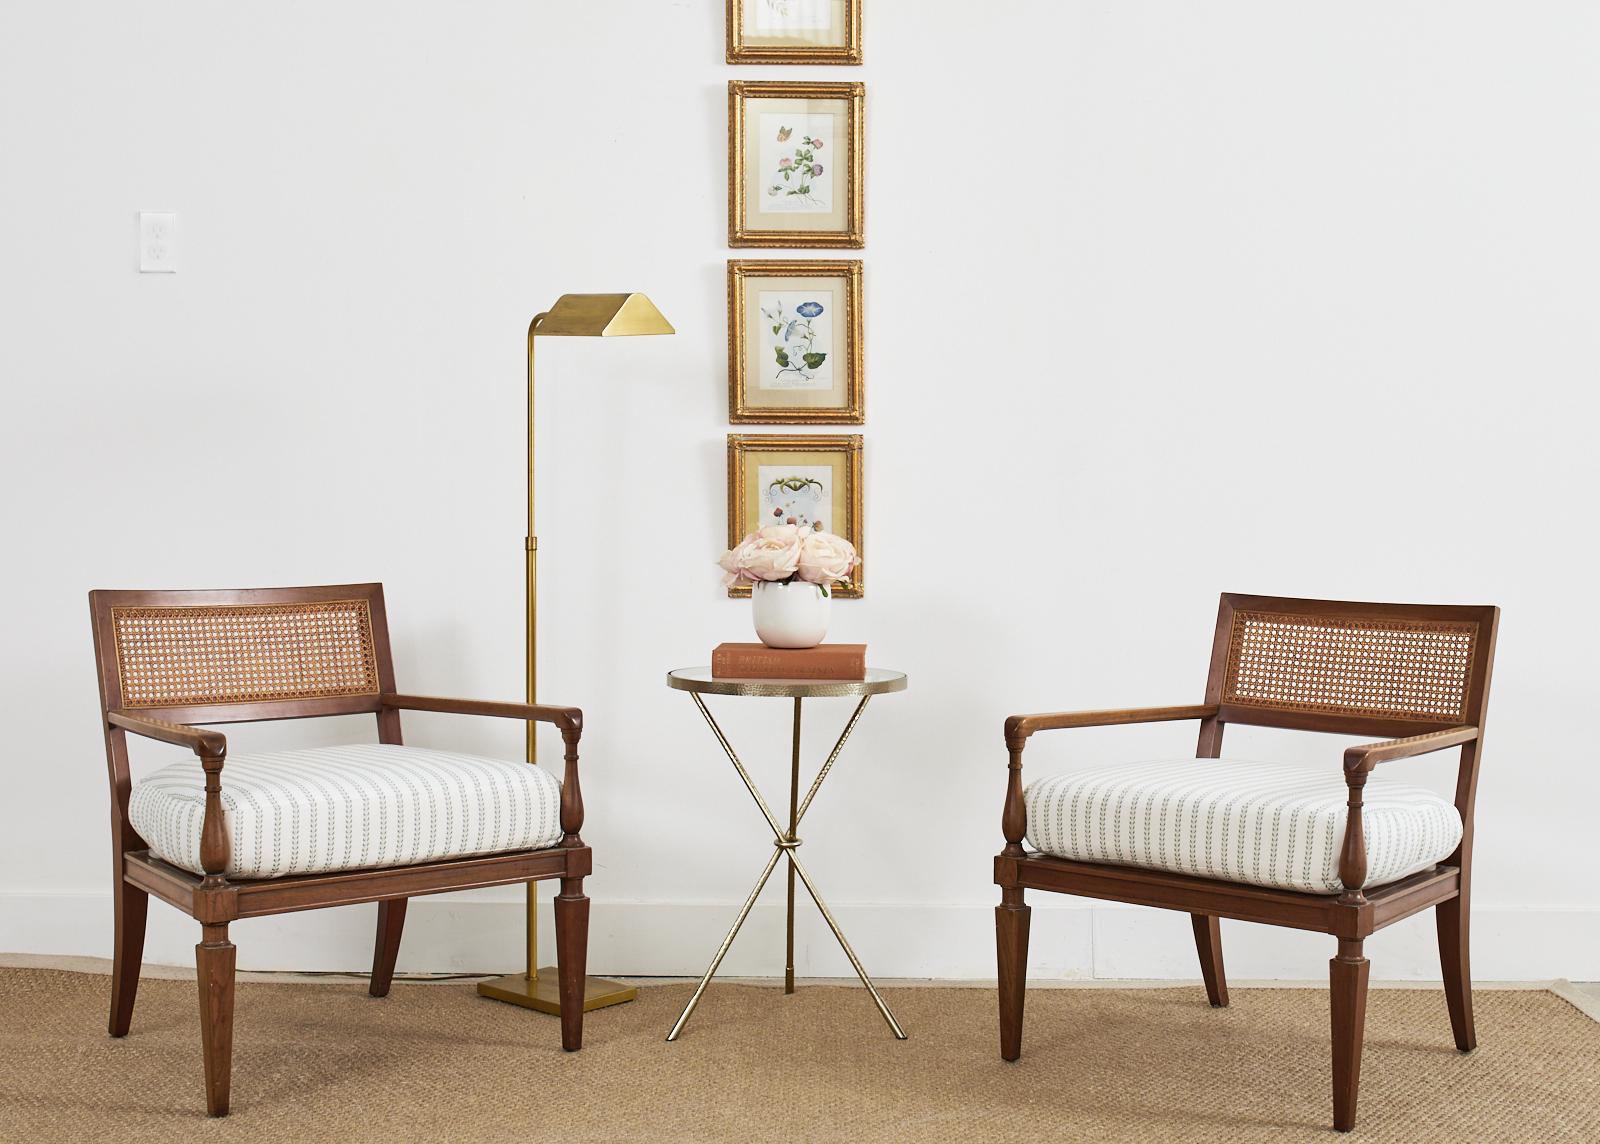 Mid-century modern pair of lounge chairs or armchairs made by Baker. The chairs feature a walnut frame with a generous caned seat and back. Constructed with neoclassical styling cues evoking designs by Michael Taylor. The chairs have a rectangular